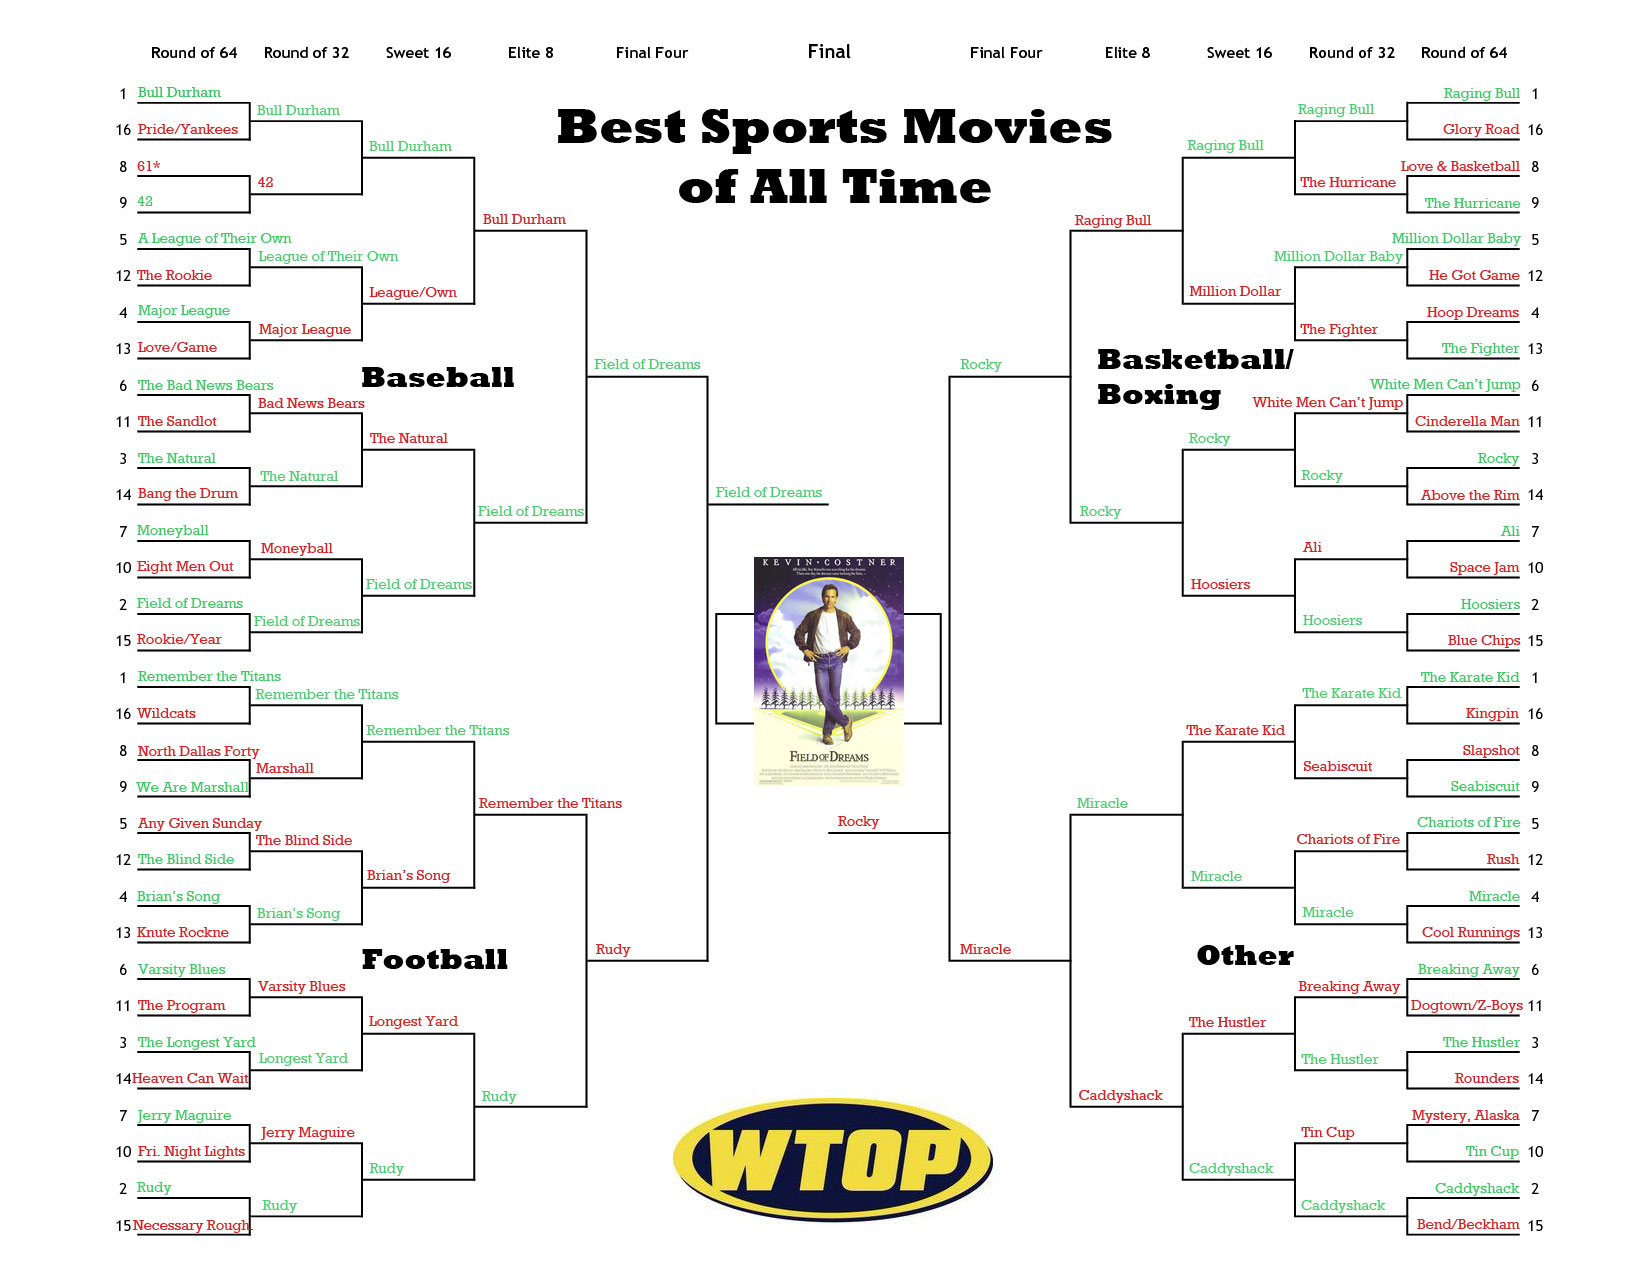 The best sports movie of all time is…